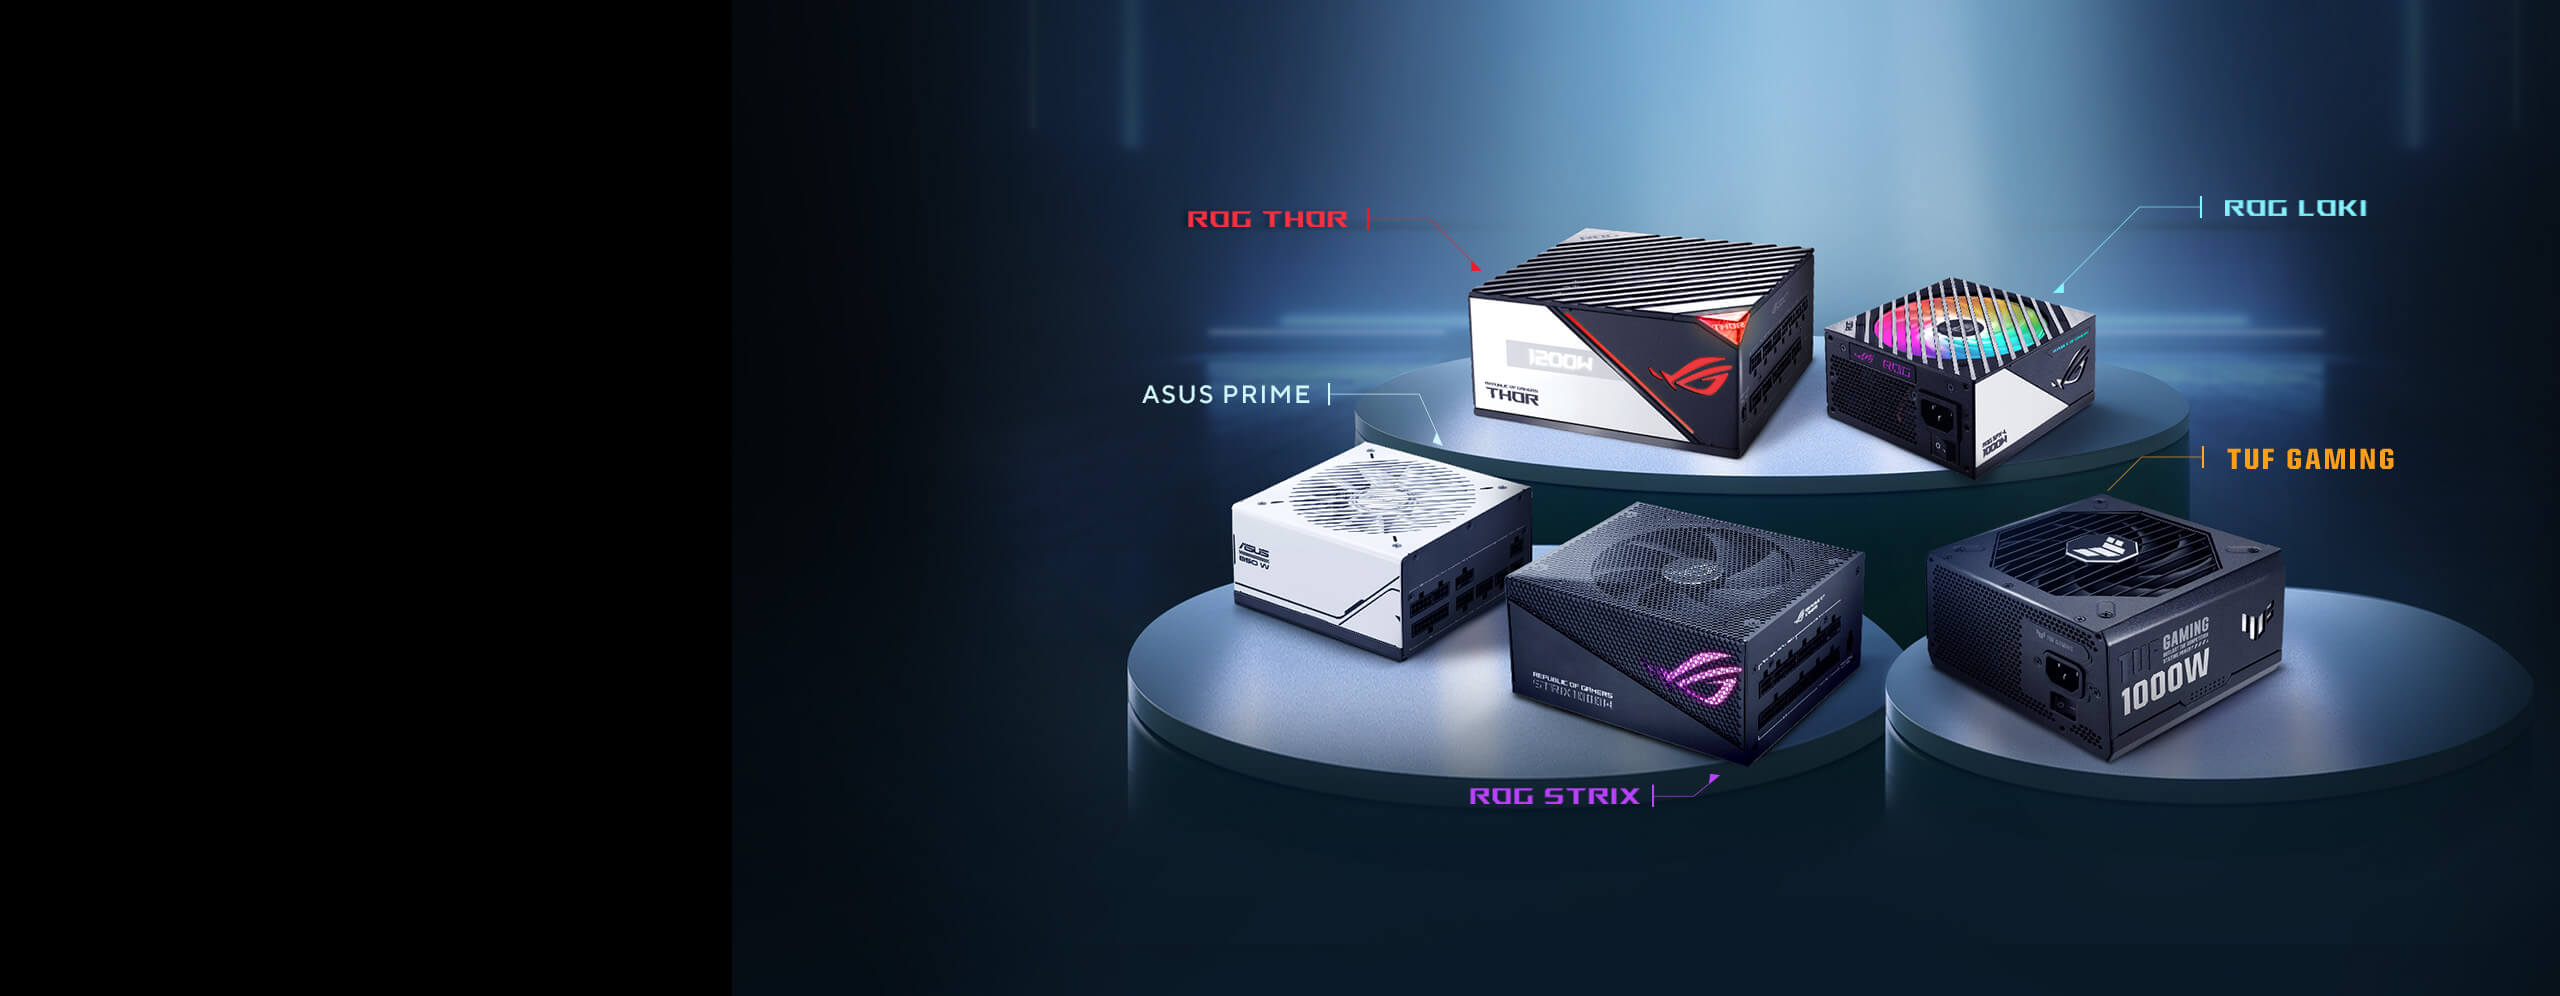 Use our wattage calculator to estimate how much power you’ll need to fuel your rig, and then pick a compatible ROG Thor, ROG Loki or ROG Strix AURA power supply for ultimate performance.